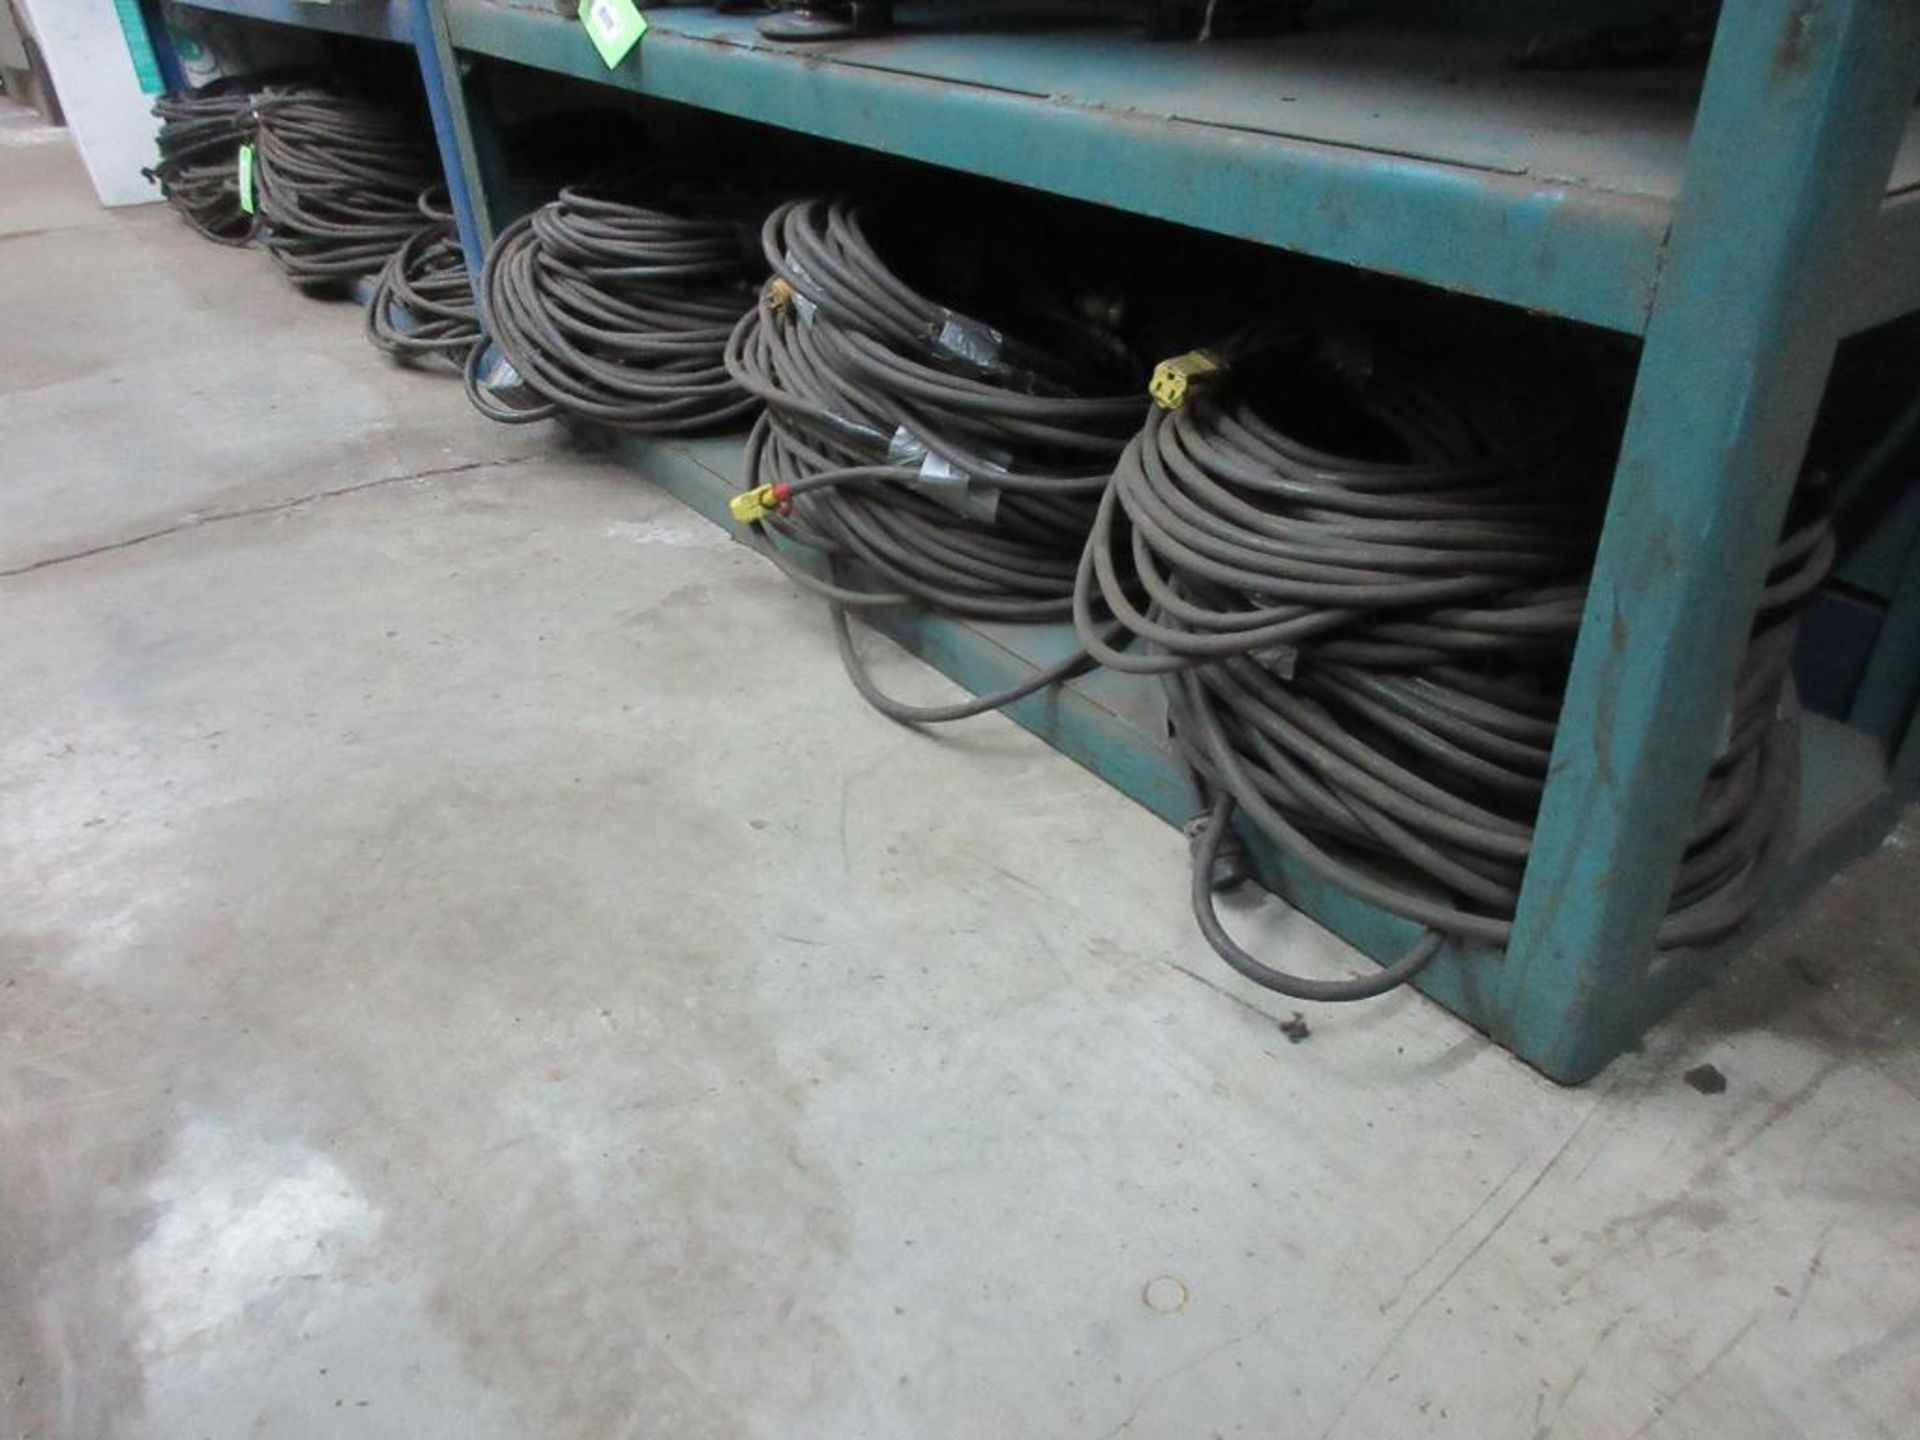 LOT OF 6 STACKS OF HEAVY DUTY CABLES (CENTRAL PARTS CRIB) - Image 2 of 2